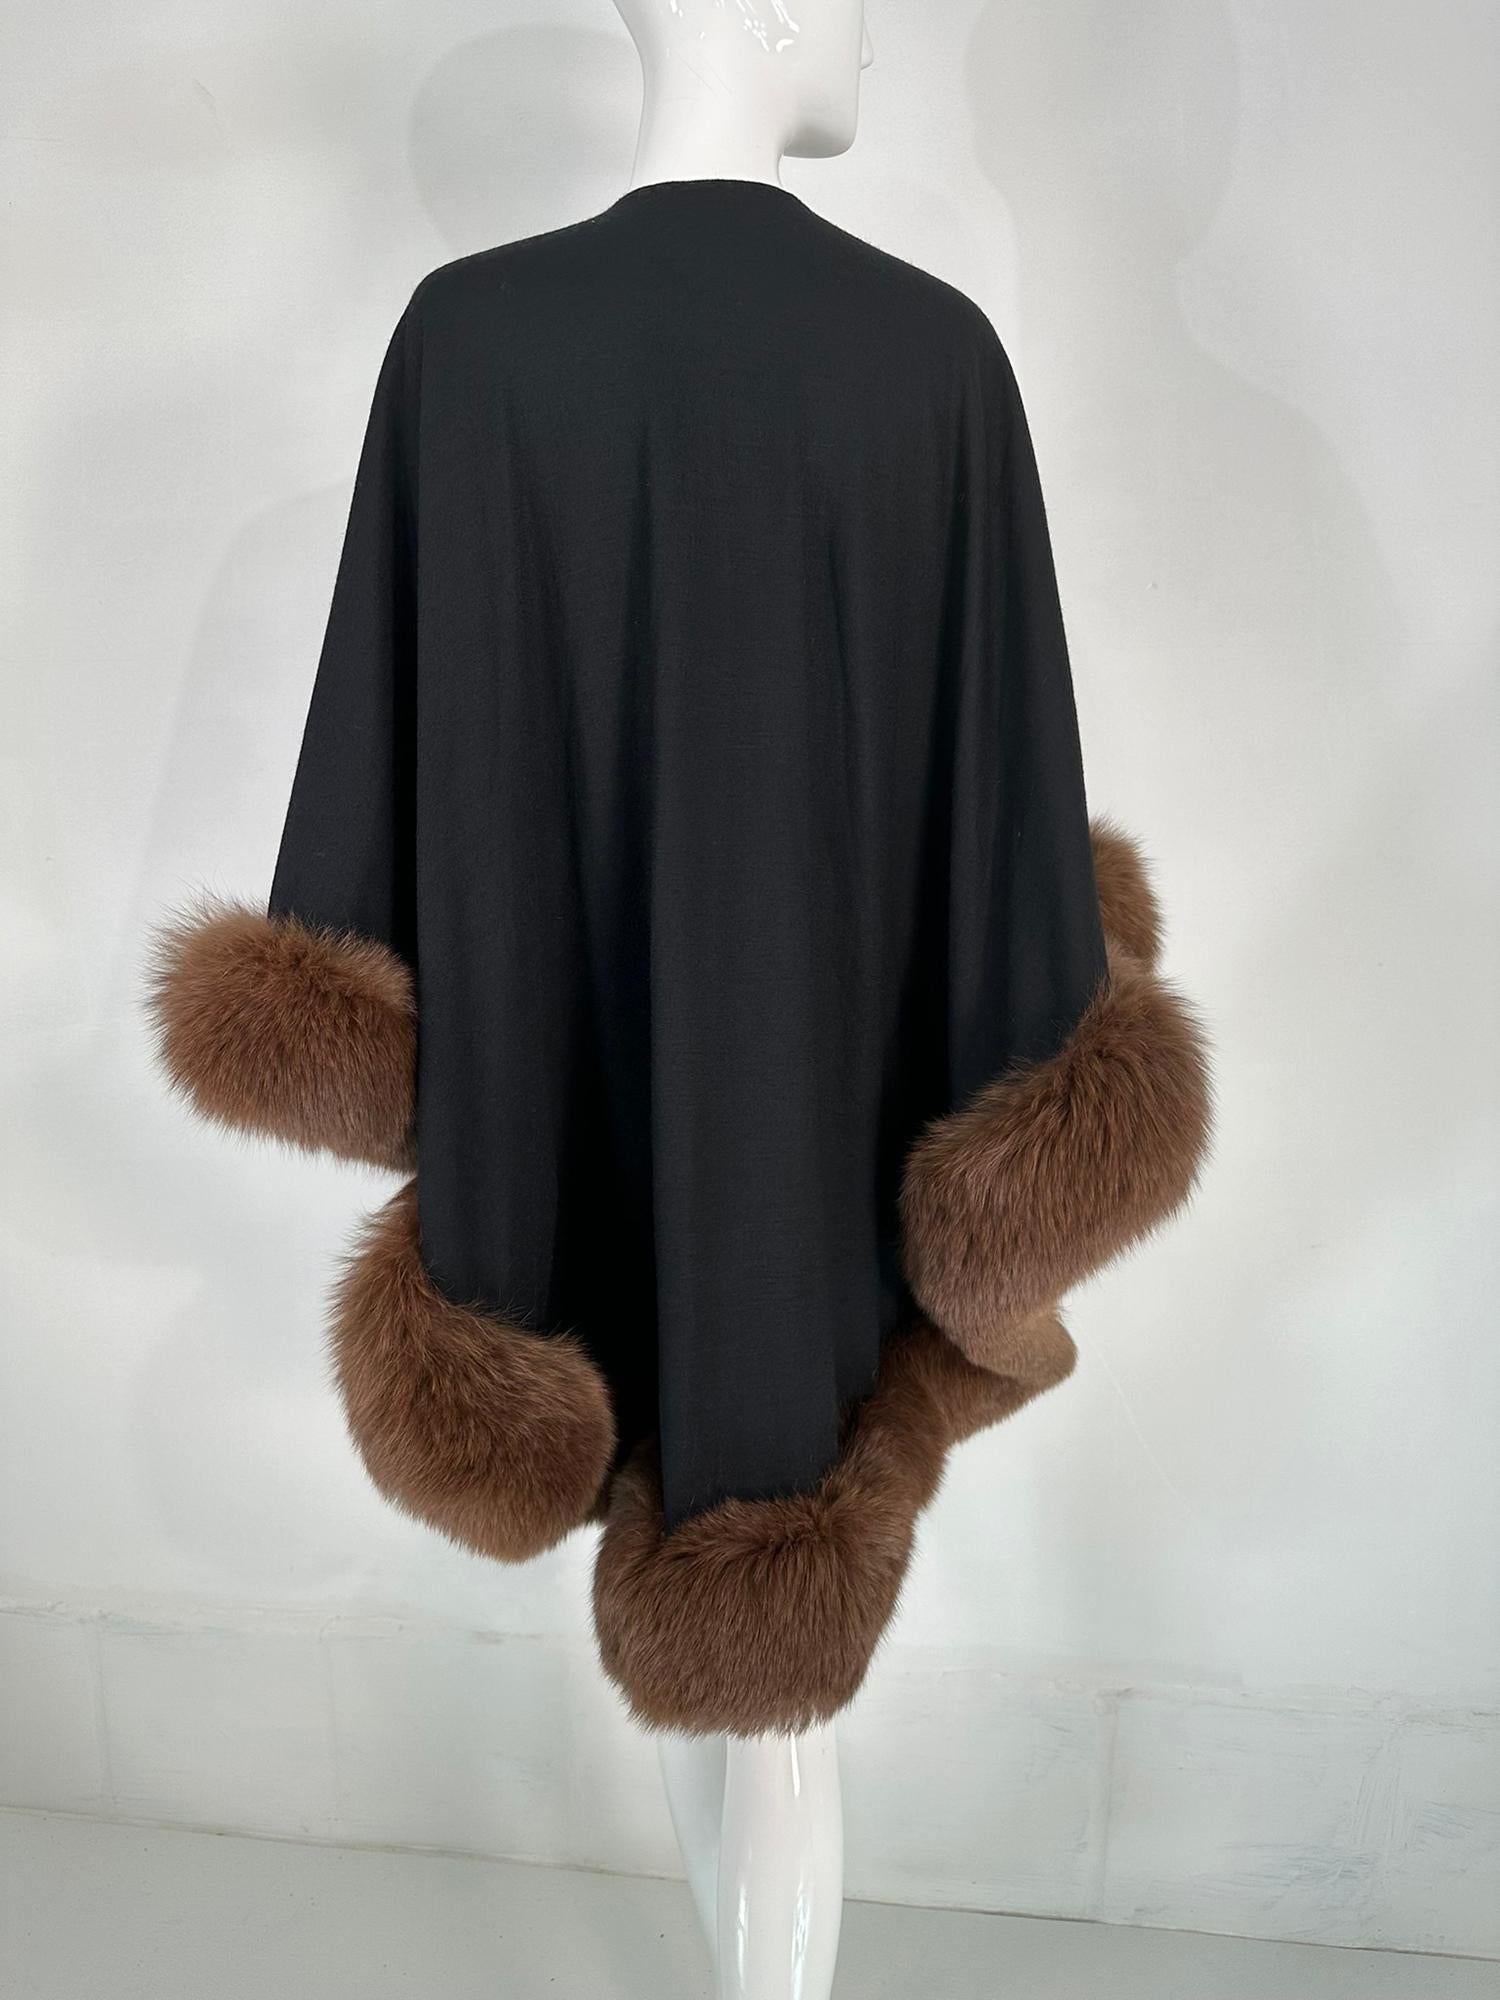 Adrienne Landau Sable Trimmed Black Wool knit Cape/Wrap From the 1990s For Sale 4